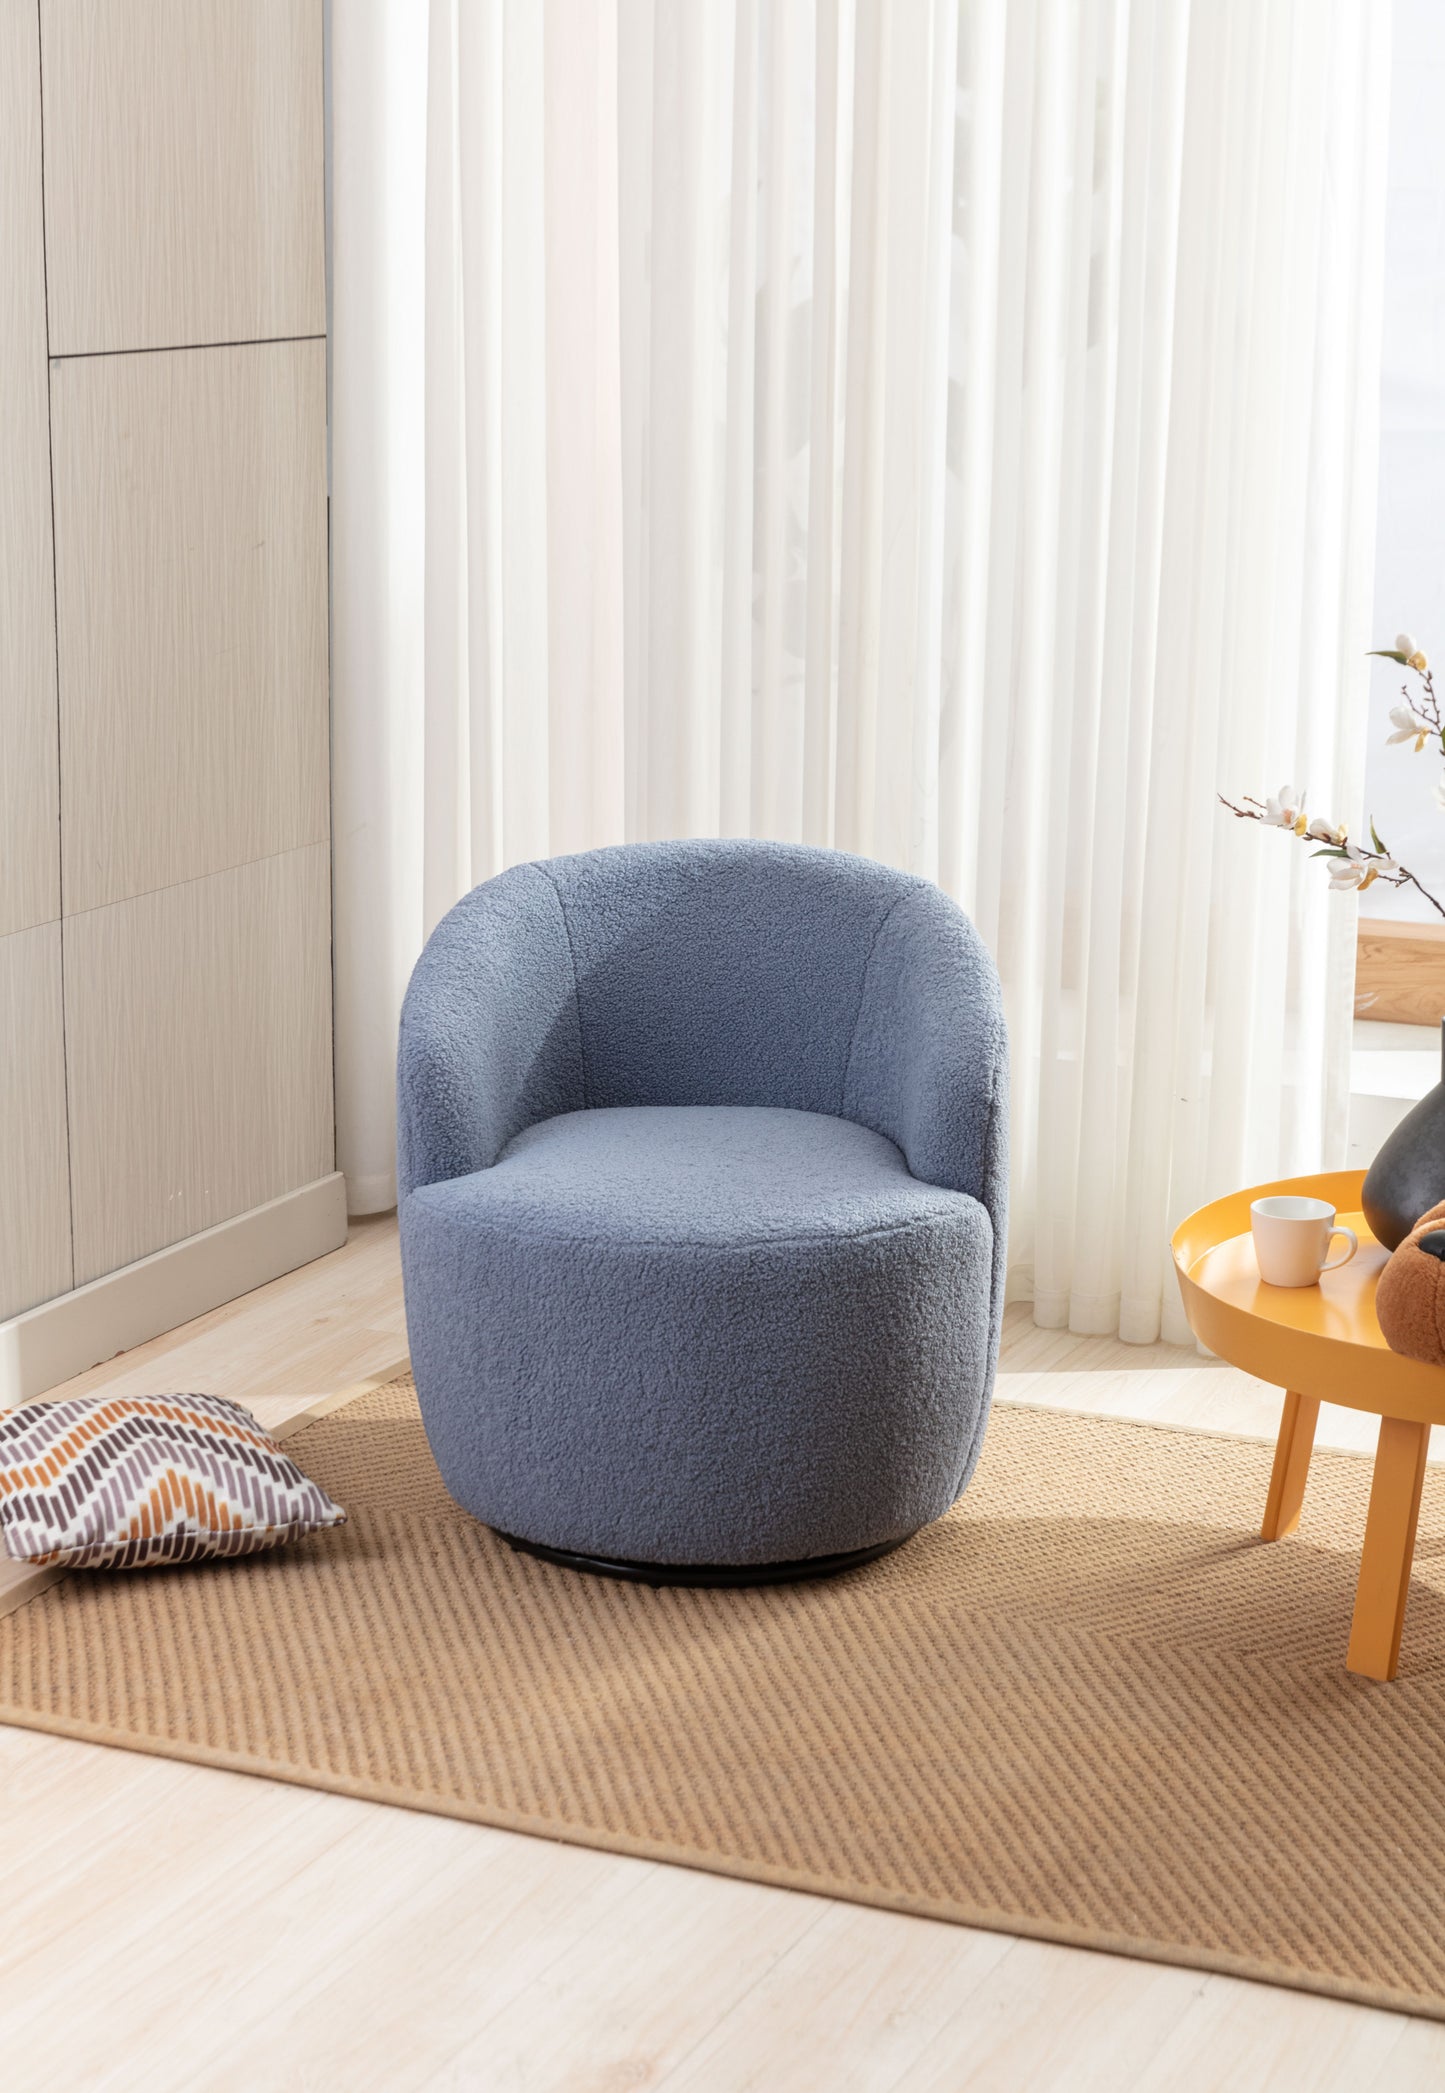 Teddy Fabric Swivel Accent Armchair Barrel Chair With Black Powder Coating Metal Ring,Light Blue